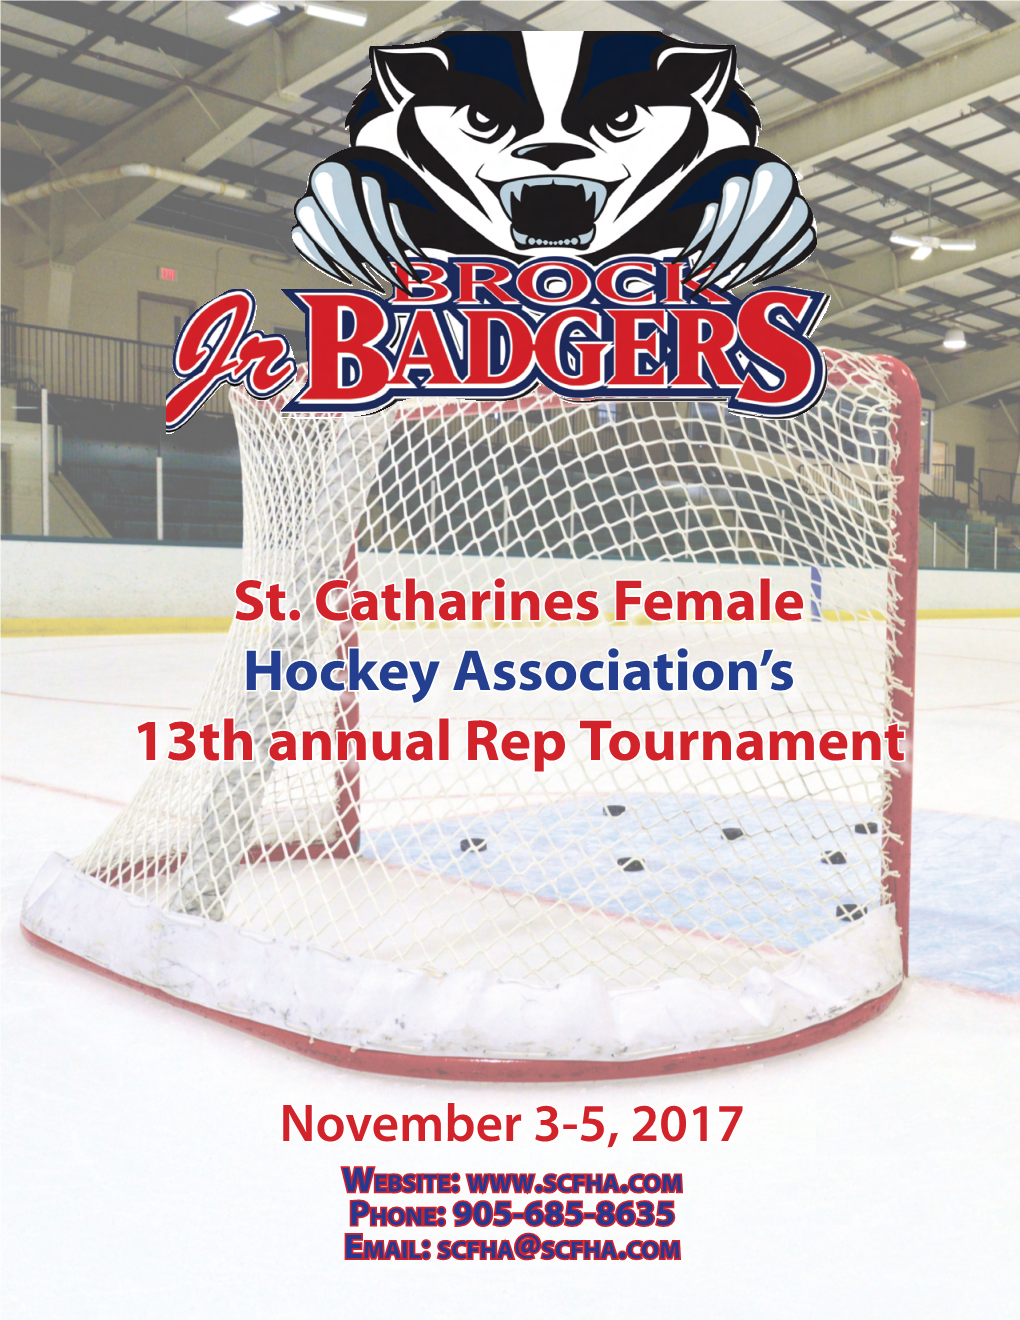 St. Catharines Female Hockey Association’S 13Th Annual Rep Tournament